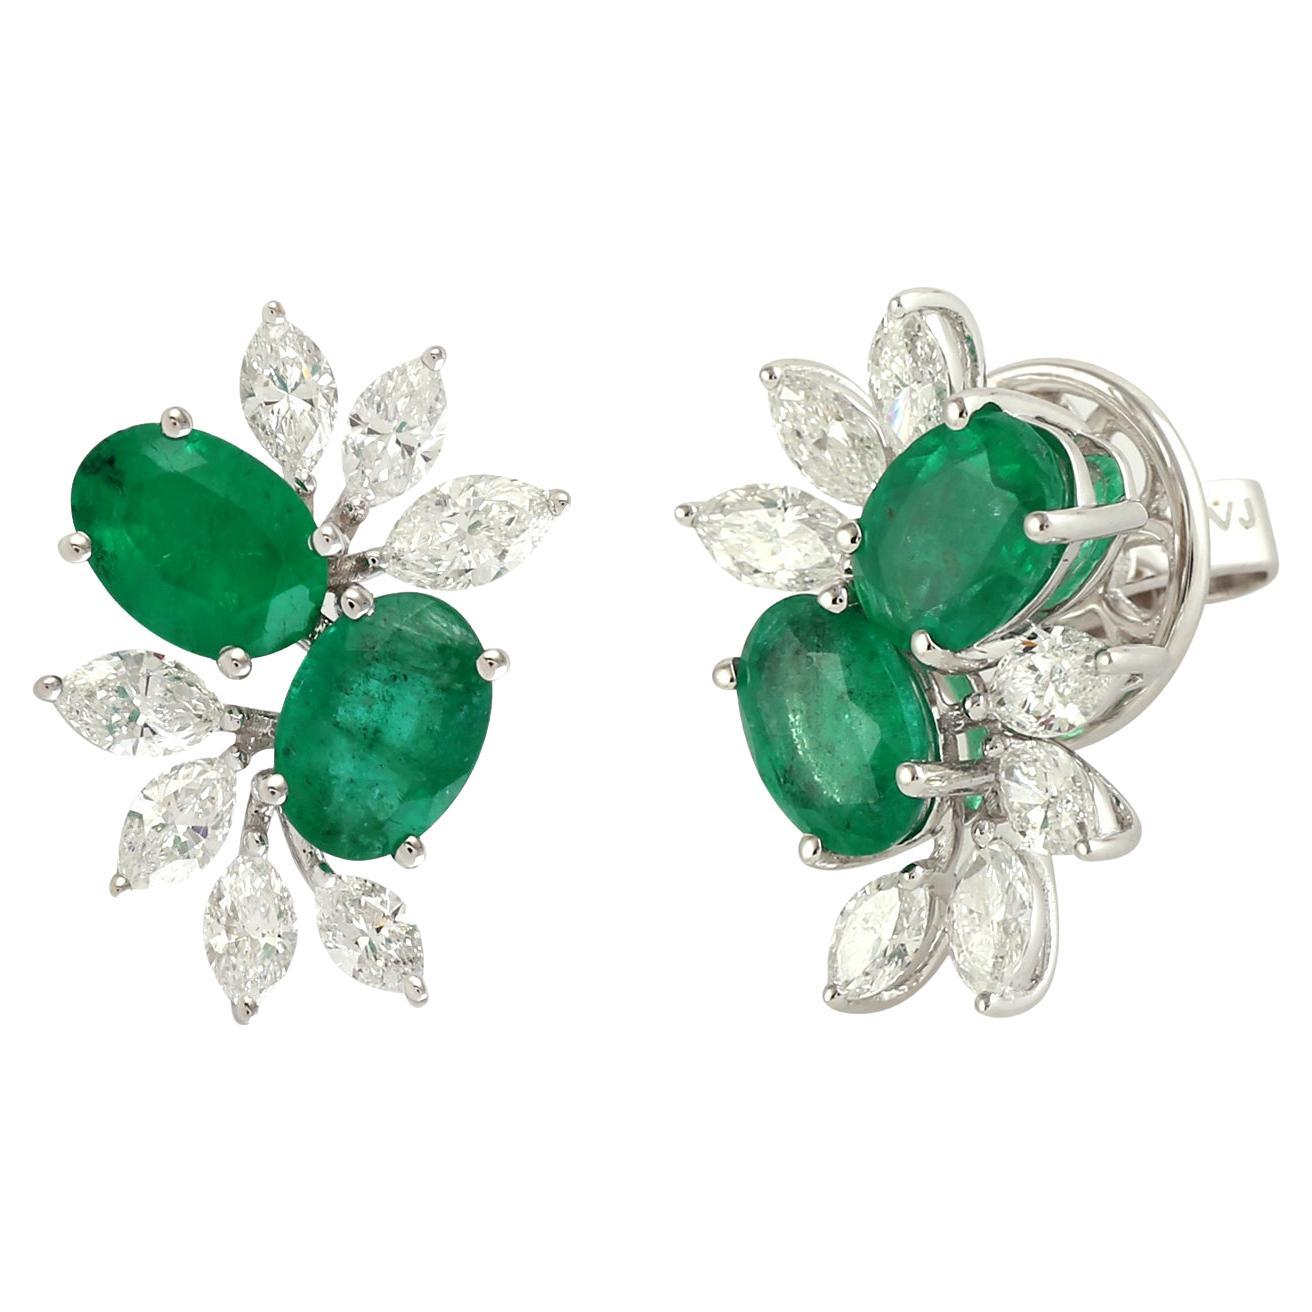 Oval Shaped Emerald & Pear Shaped Diamonds Studs Made In 18k White Gold